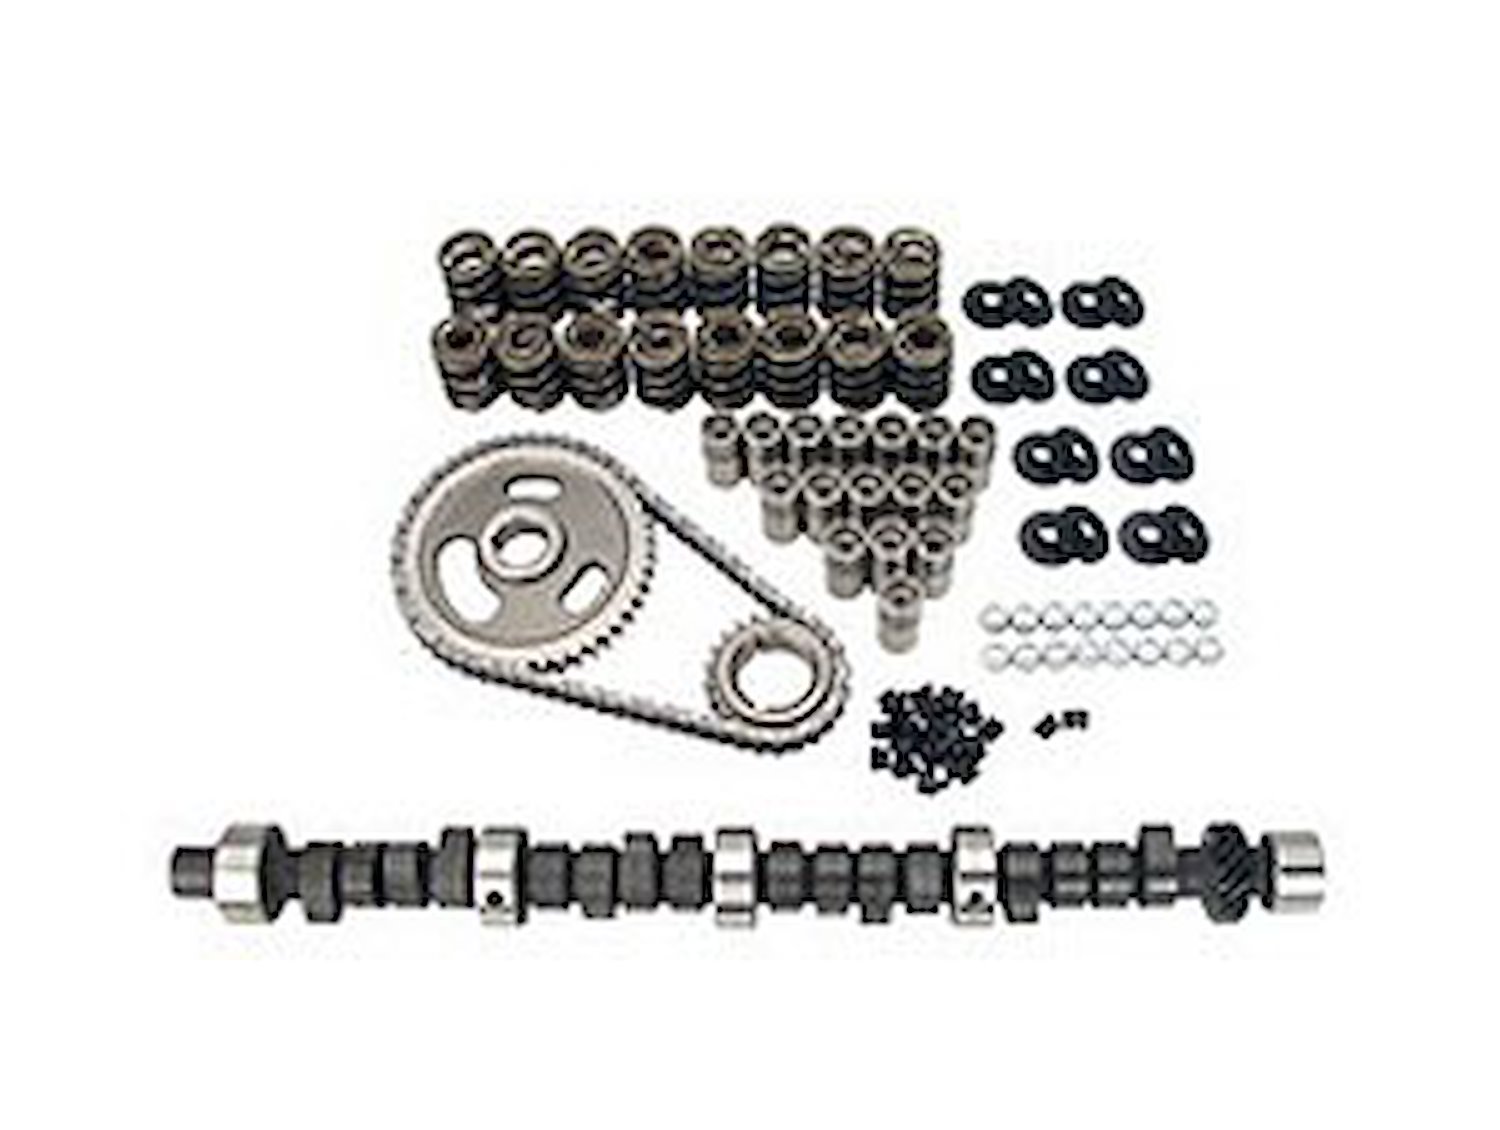 Thumpr Hydraulic Flat Tappet Camshaft Complete Kit Lift .500"/.486" Duration 287/304 RPM Range 2200-6100